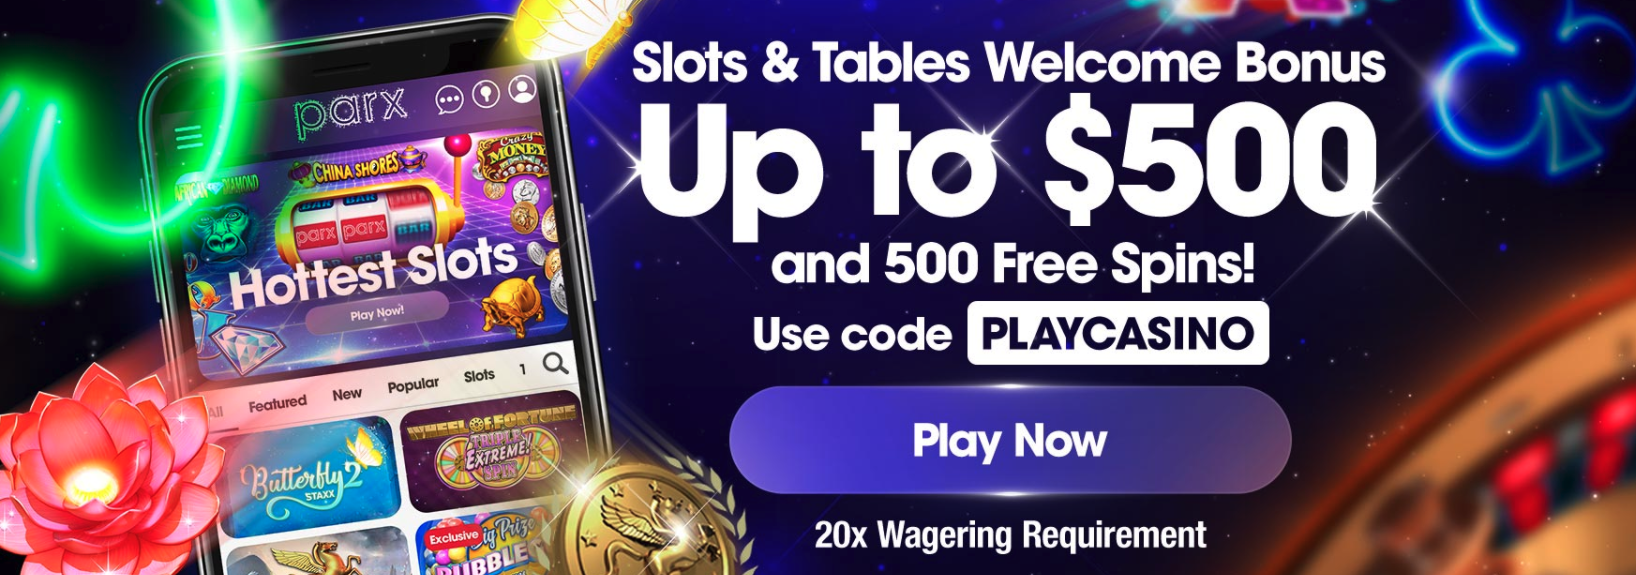 parx casino online new plater